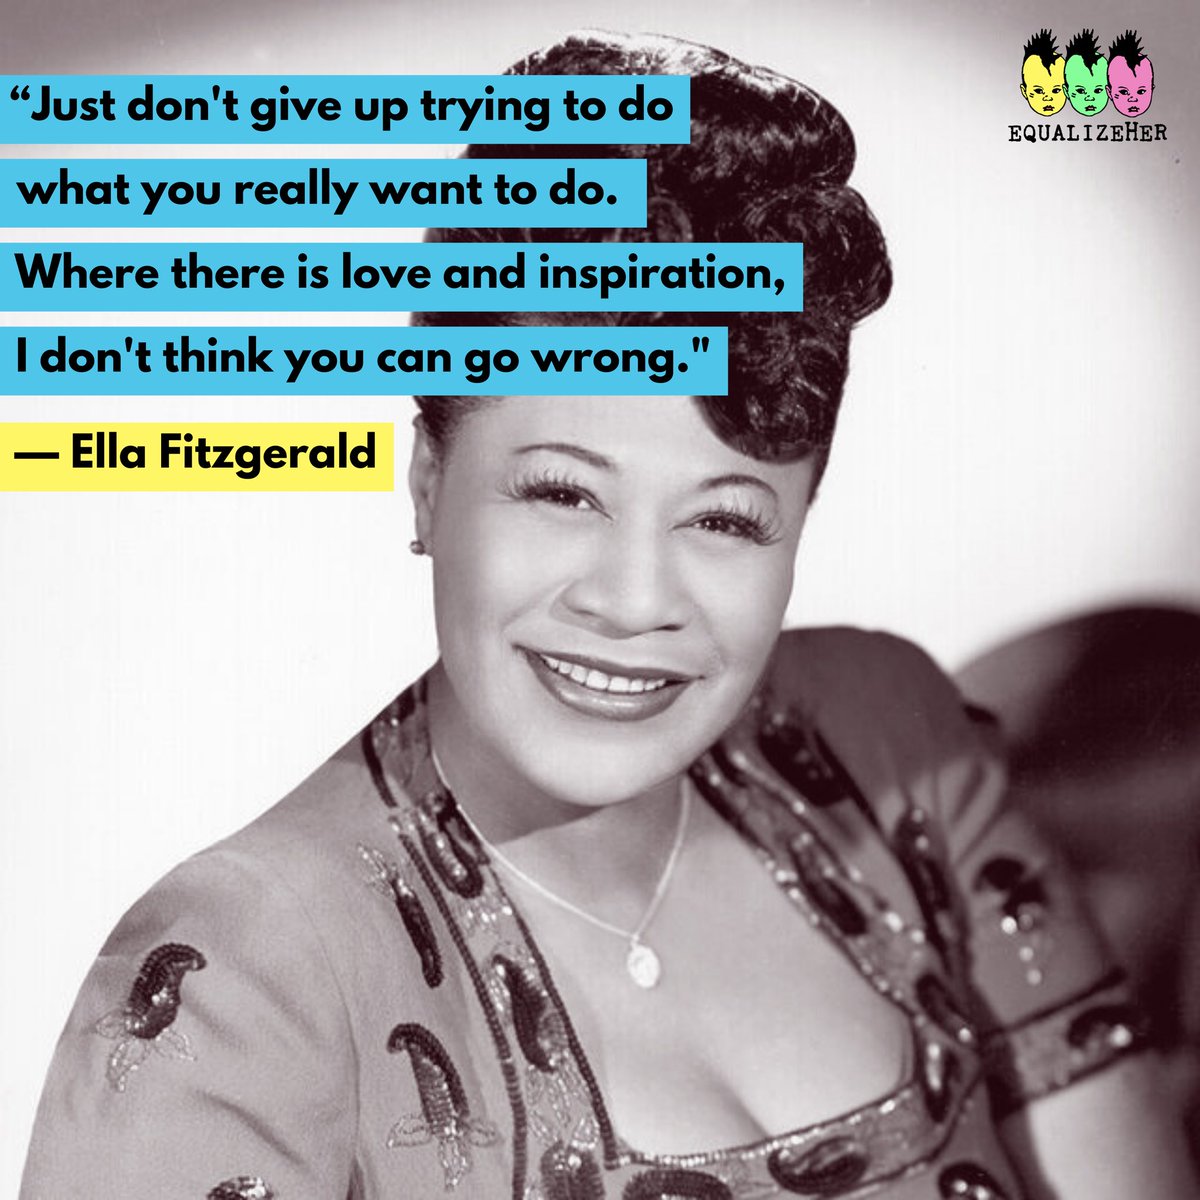 Couldn’t have said it any better than the queen herself @EllaFitzgerald 👏